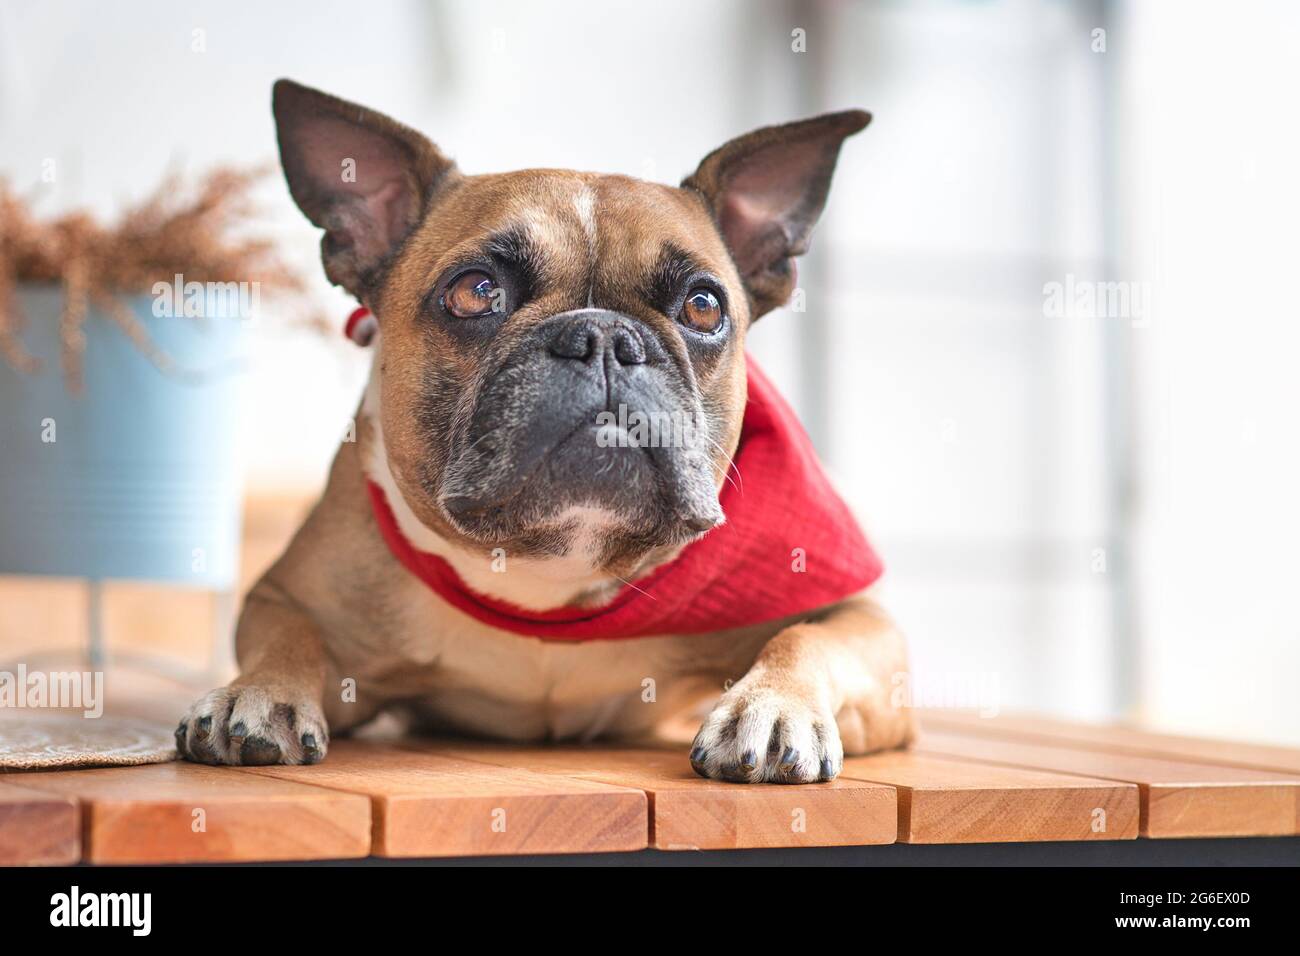 Curious French Bulldog dog with pointy ears wearing a red neckerchief while lying down Stock Photo